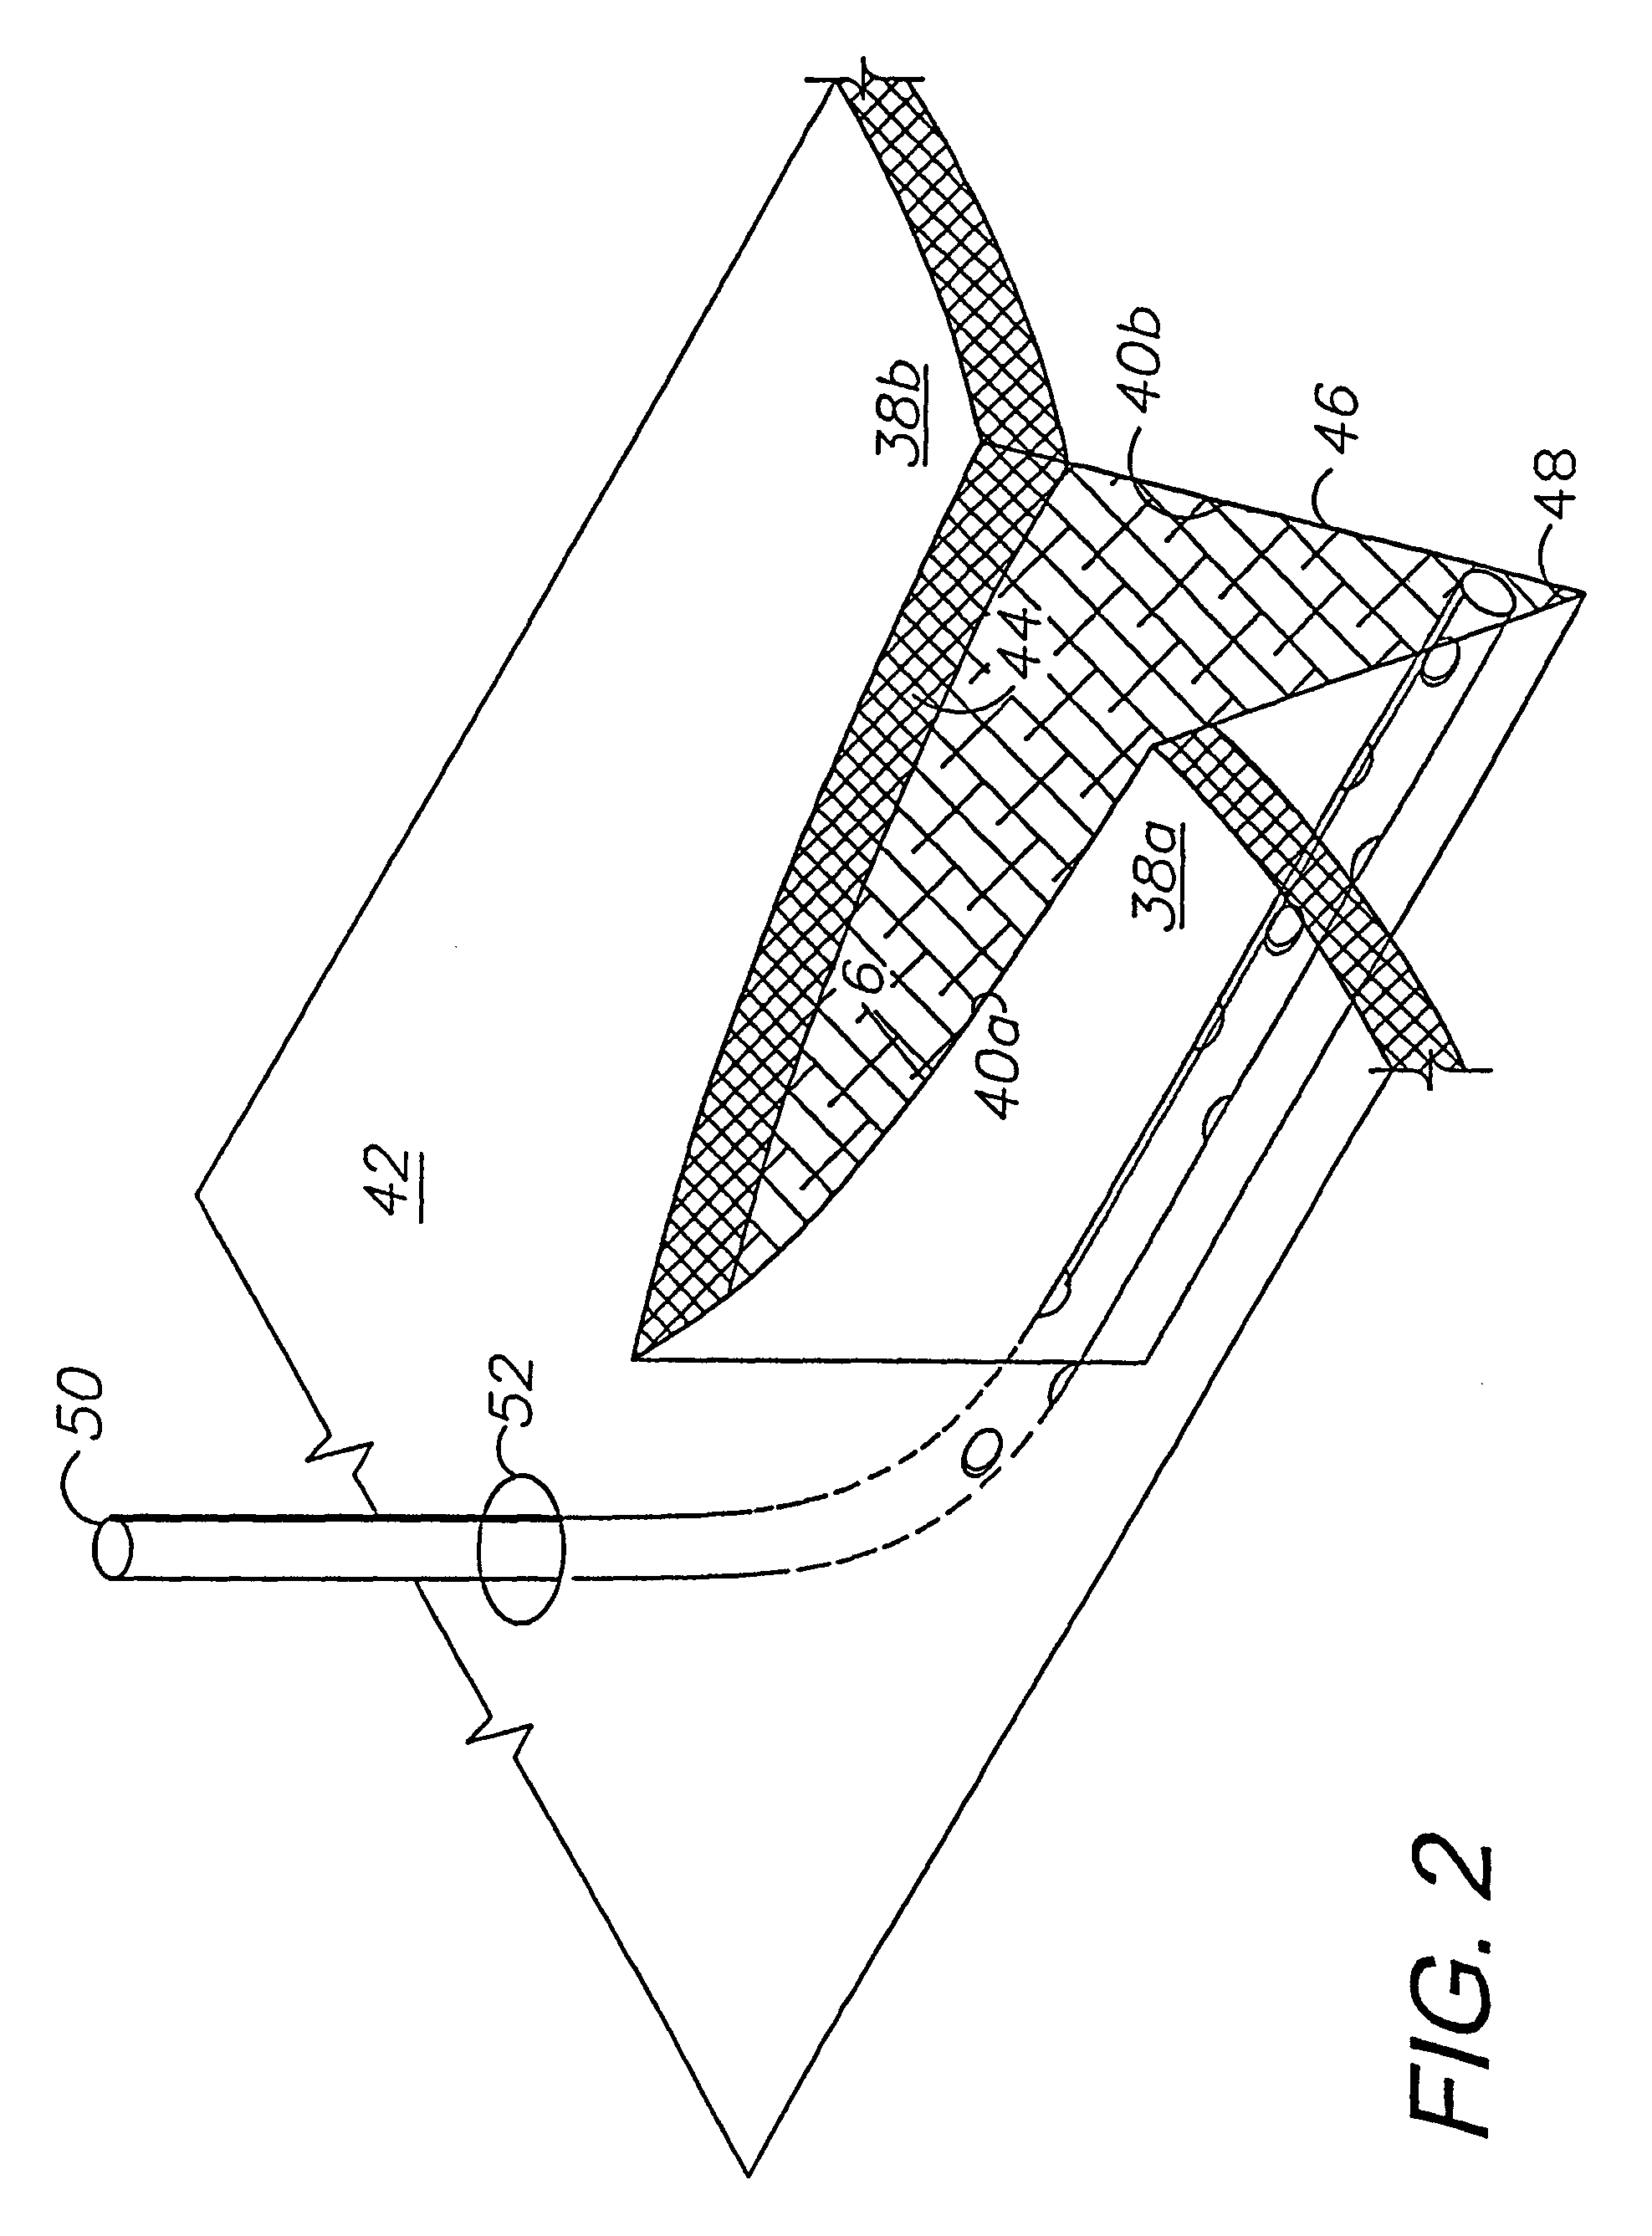 Externally-applied patient interface system and method